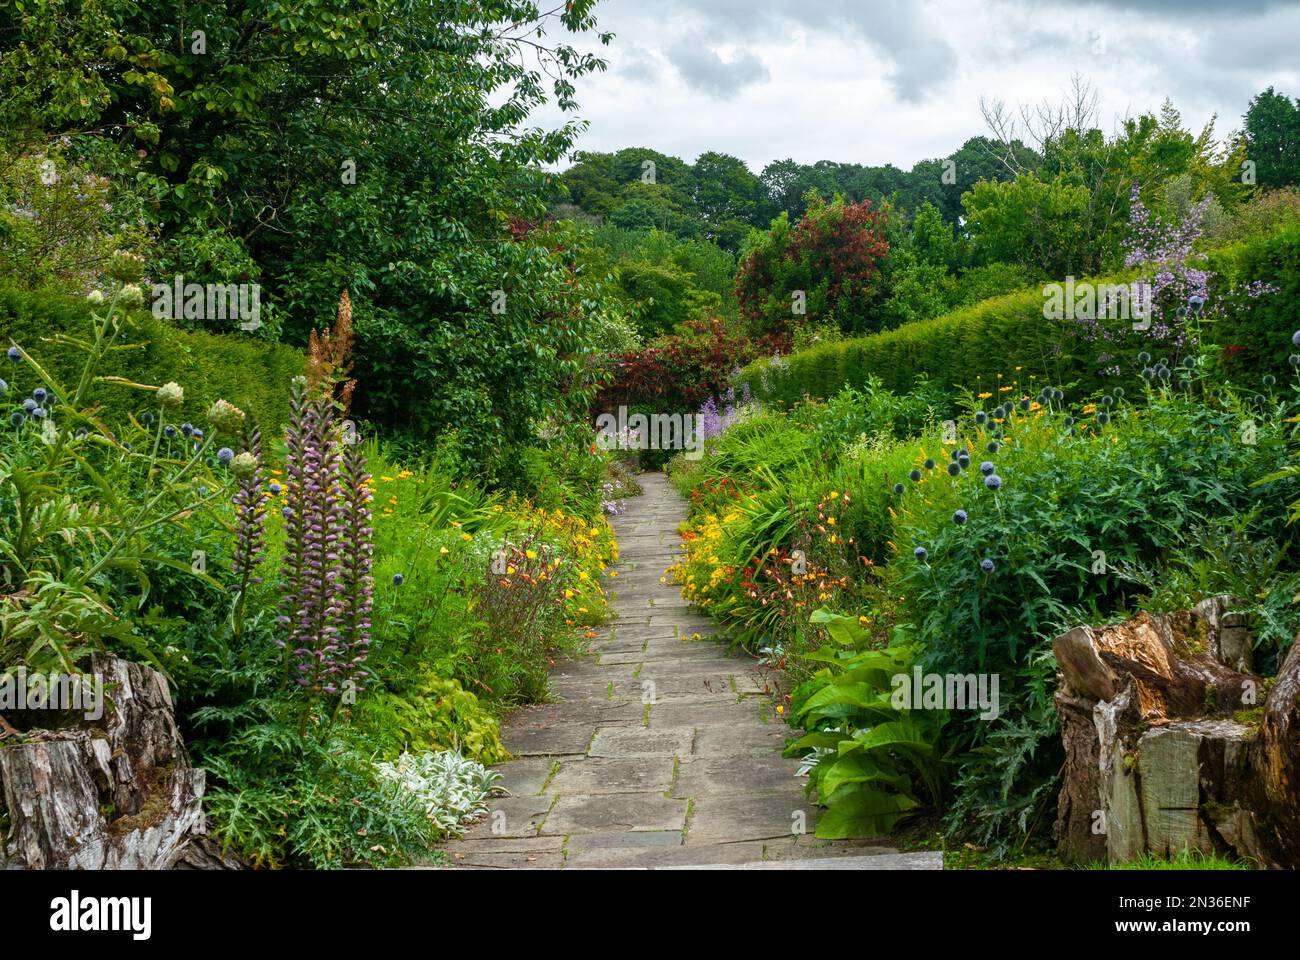 Beautiful garden in a riot of colour during summer, vibrant greens, reds, yellows, and blues. With a pathway running through the middle. Stock Photo